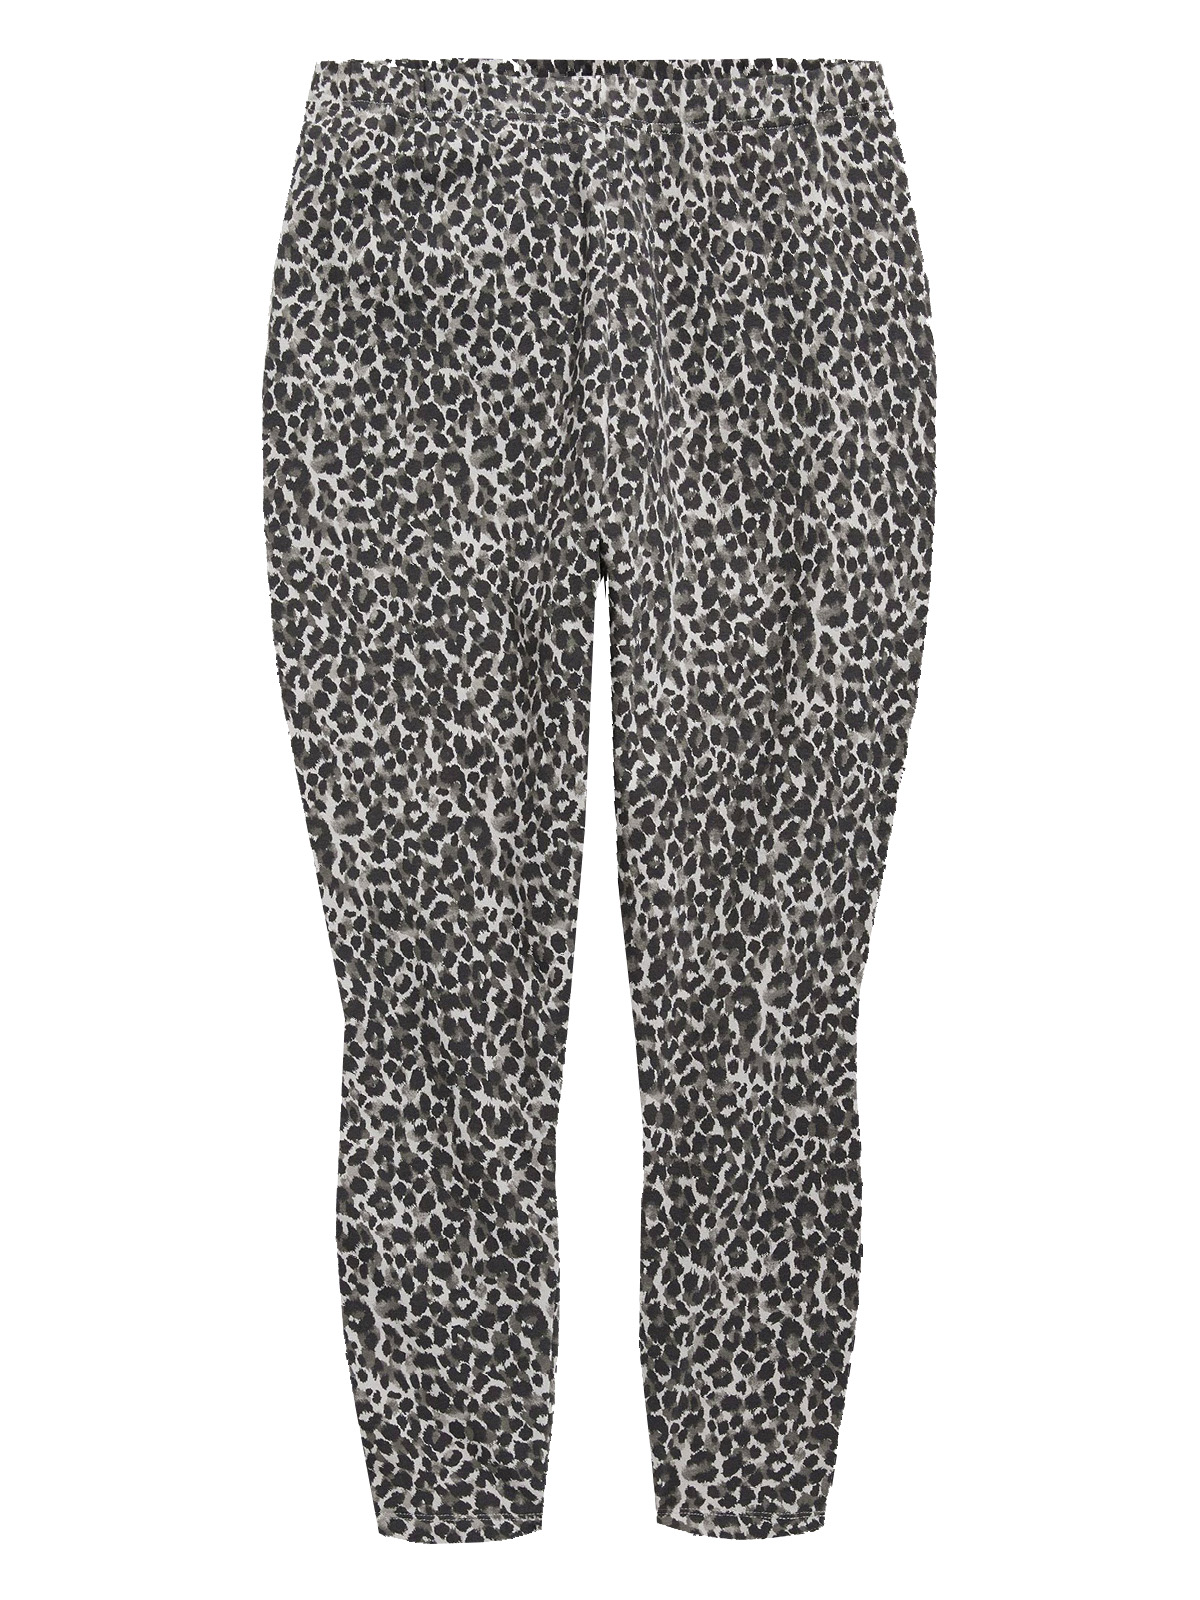 Old Navy - - Old Navy GREY High-Waisted Cropped Leggings - Plus Size 22 ...